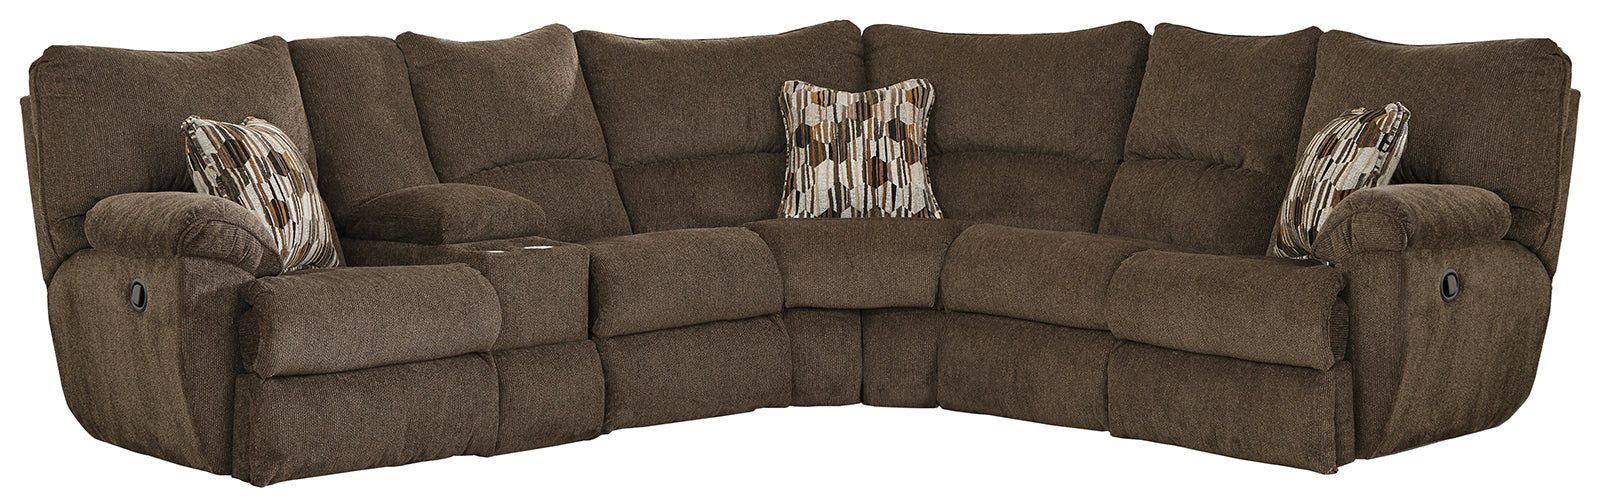 Catnapper Elliott 2pc Power Lay Flat Reclining Sectional in Chocolate image